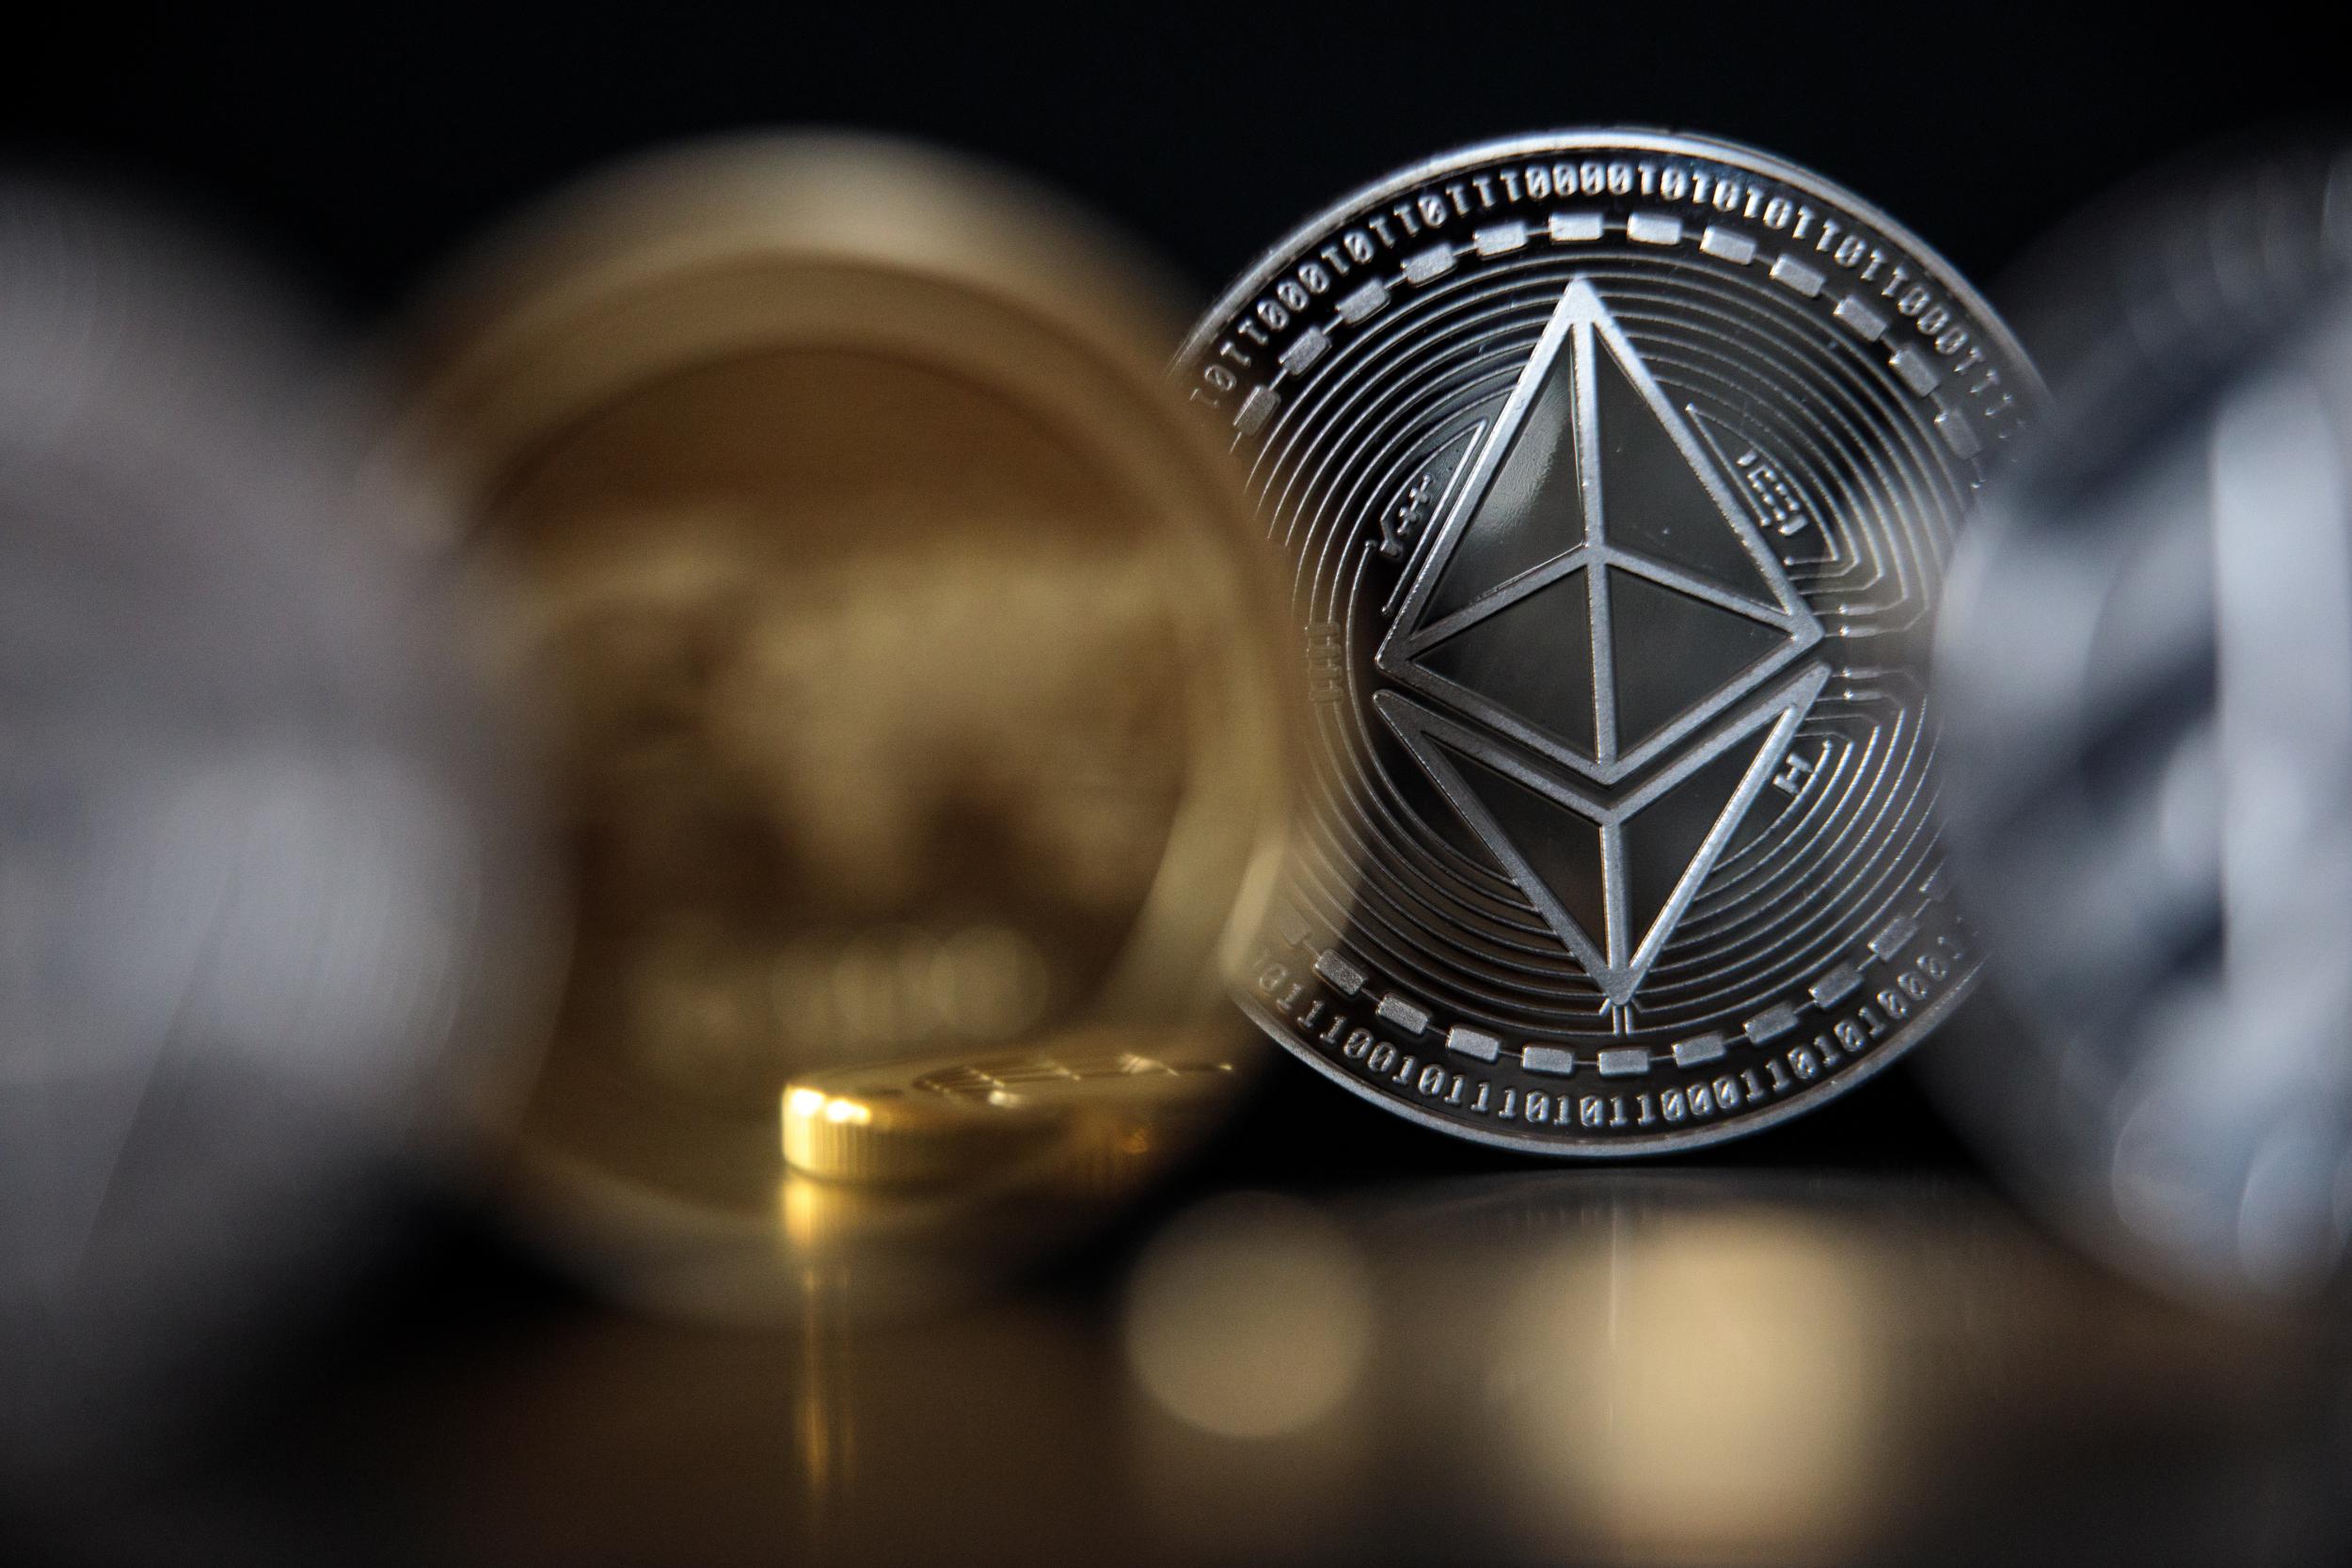 Ethereum has a market cap of over $50 billion, second only to bitcoin